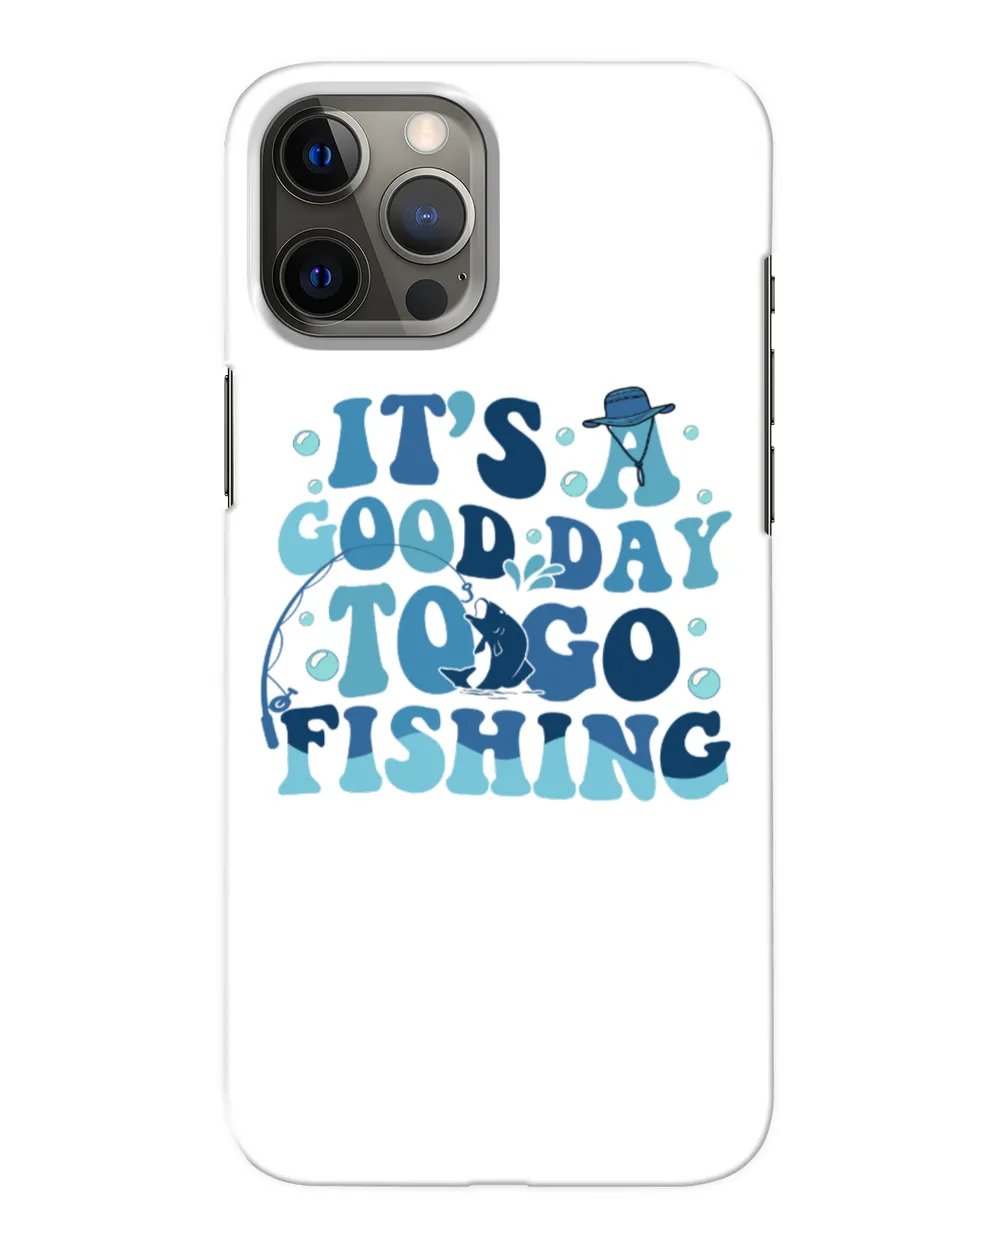 It's A Good Day To Go Fishing Sweatshirt, Hoodies, Tote Bag, Canvas